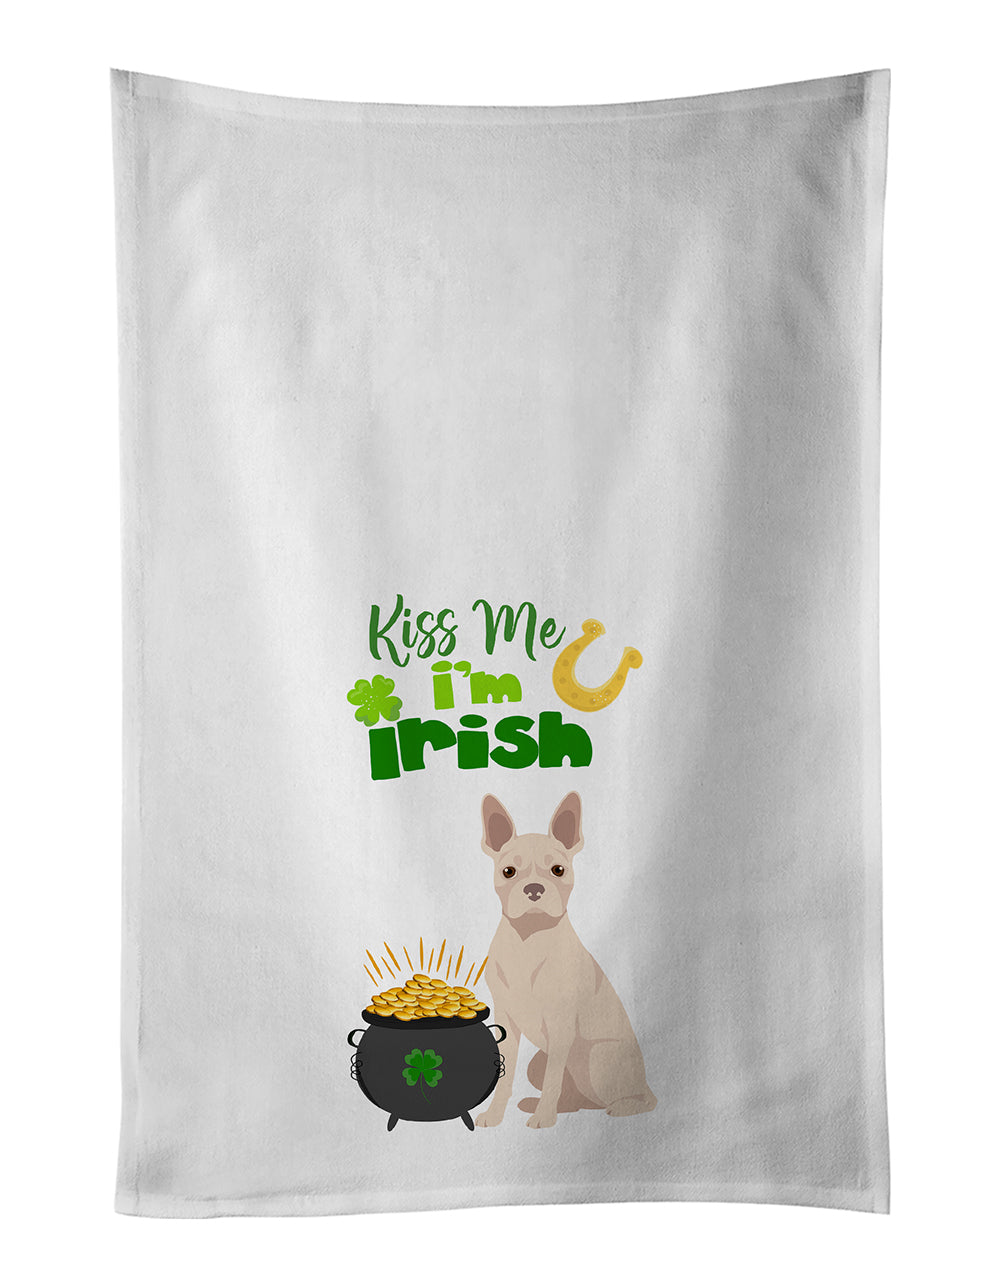 Buy this White Boston Terrier St. Patrick's Day White Kitchen Towel Set of 2 Dish Towels